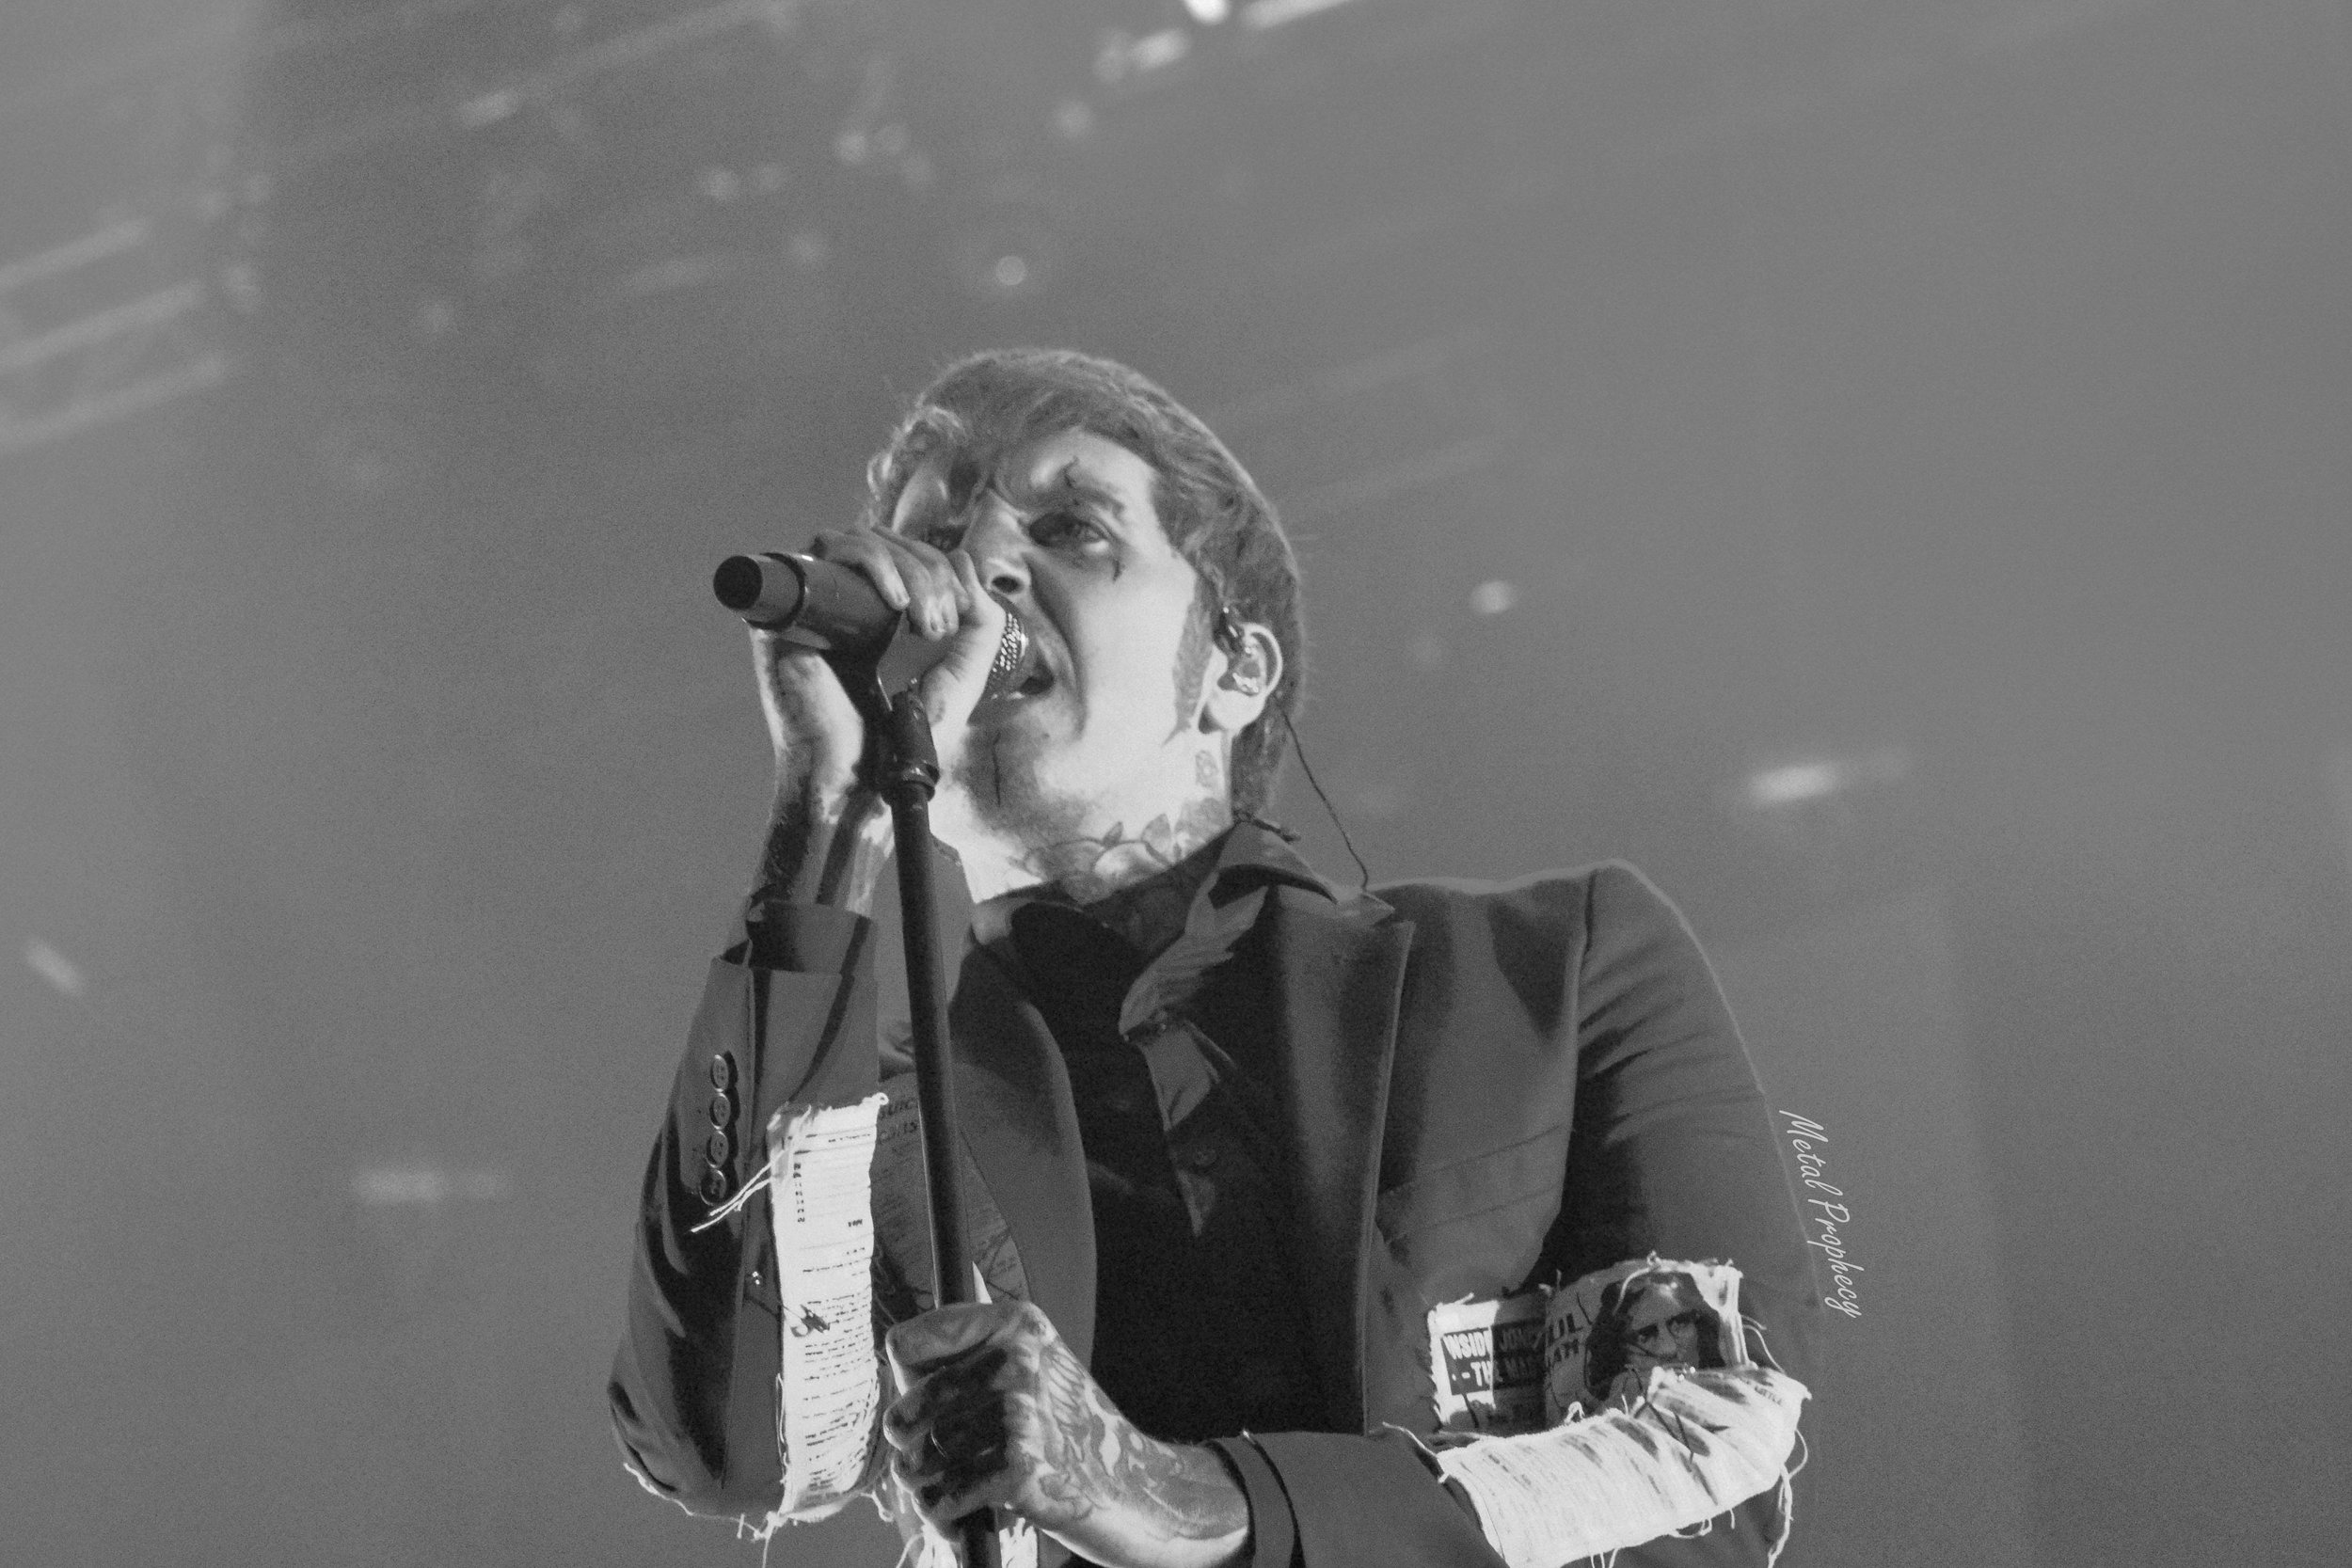 Bring Me the Horizon at Welcome to Rockville 2019